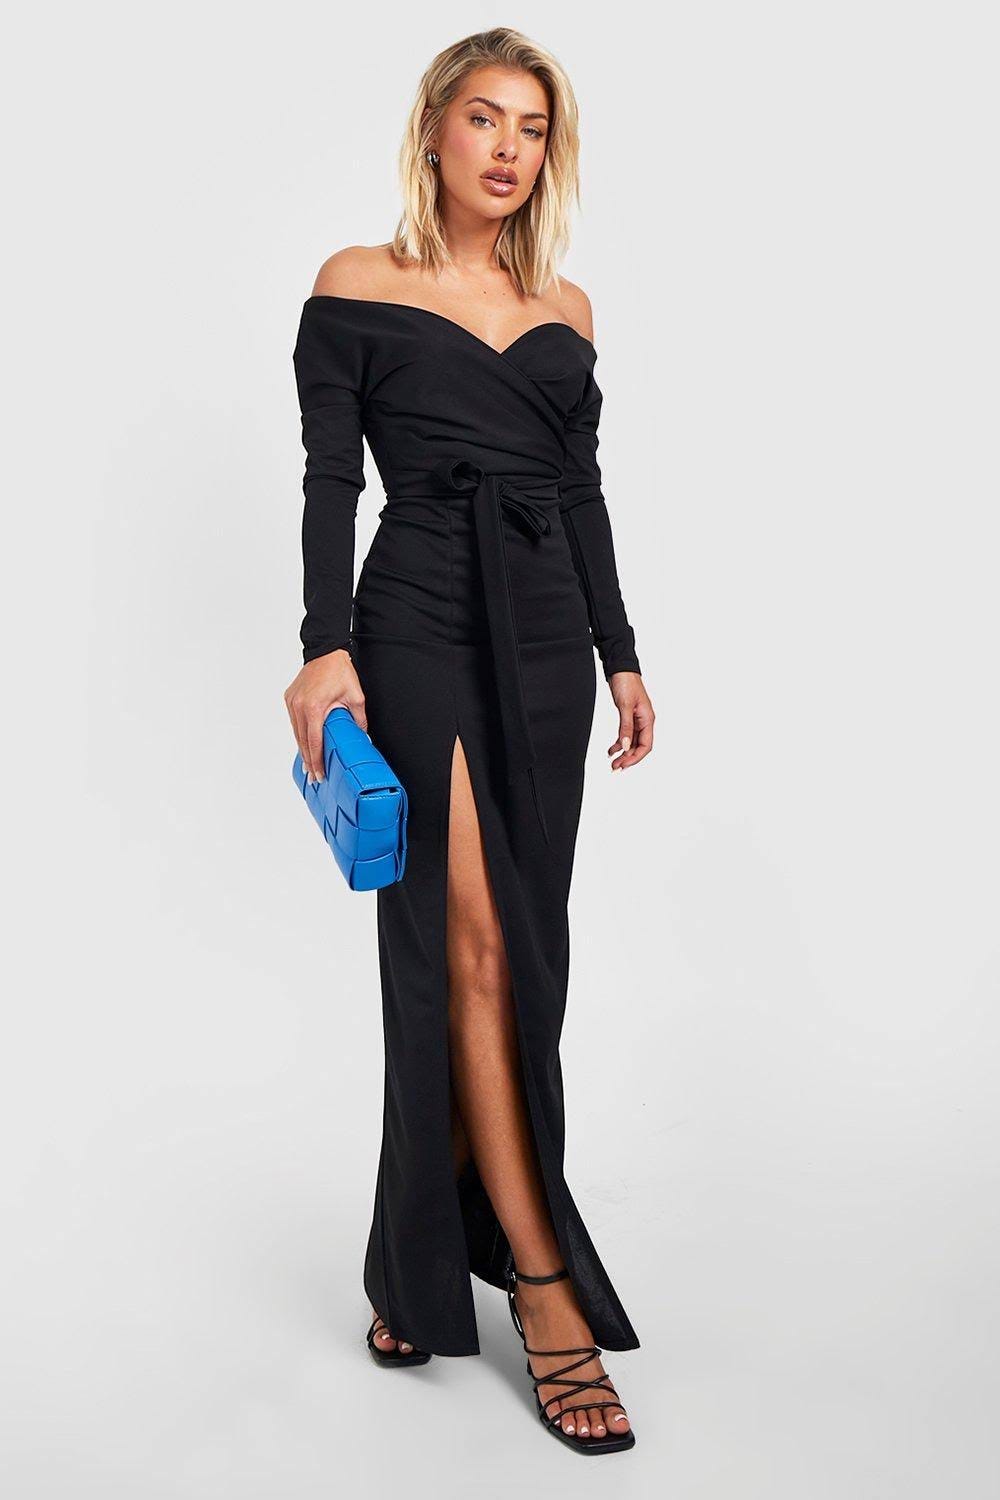 Black Maxi Bridesmaid Dress by boohoo - Split Sleeves and Statement Style | Image